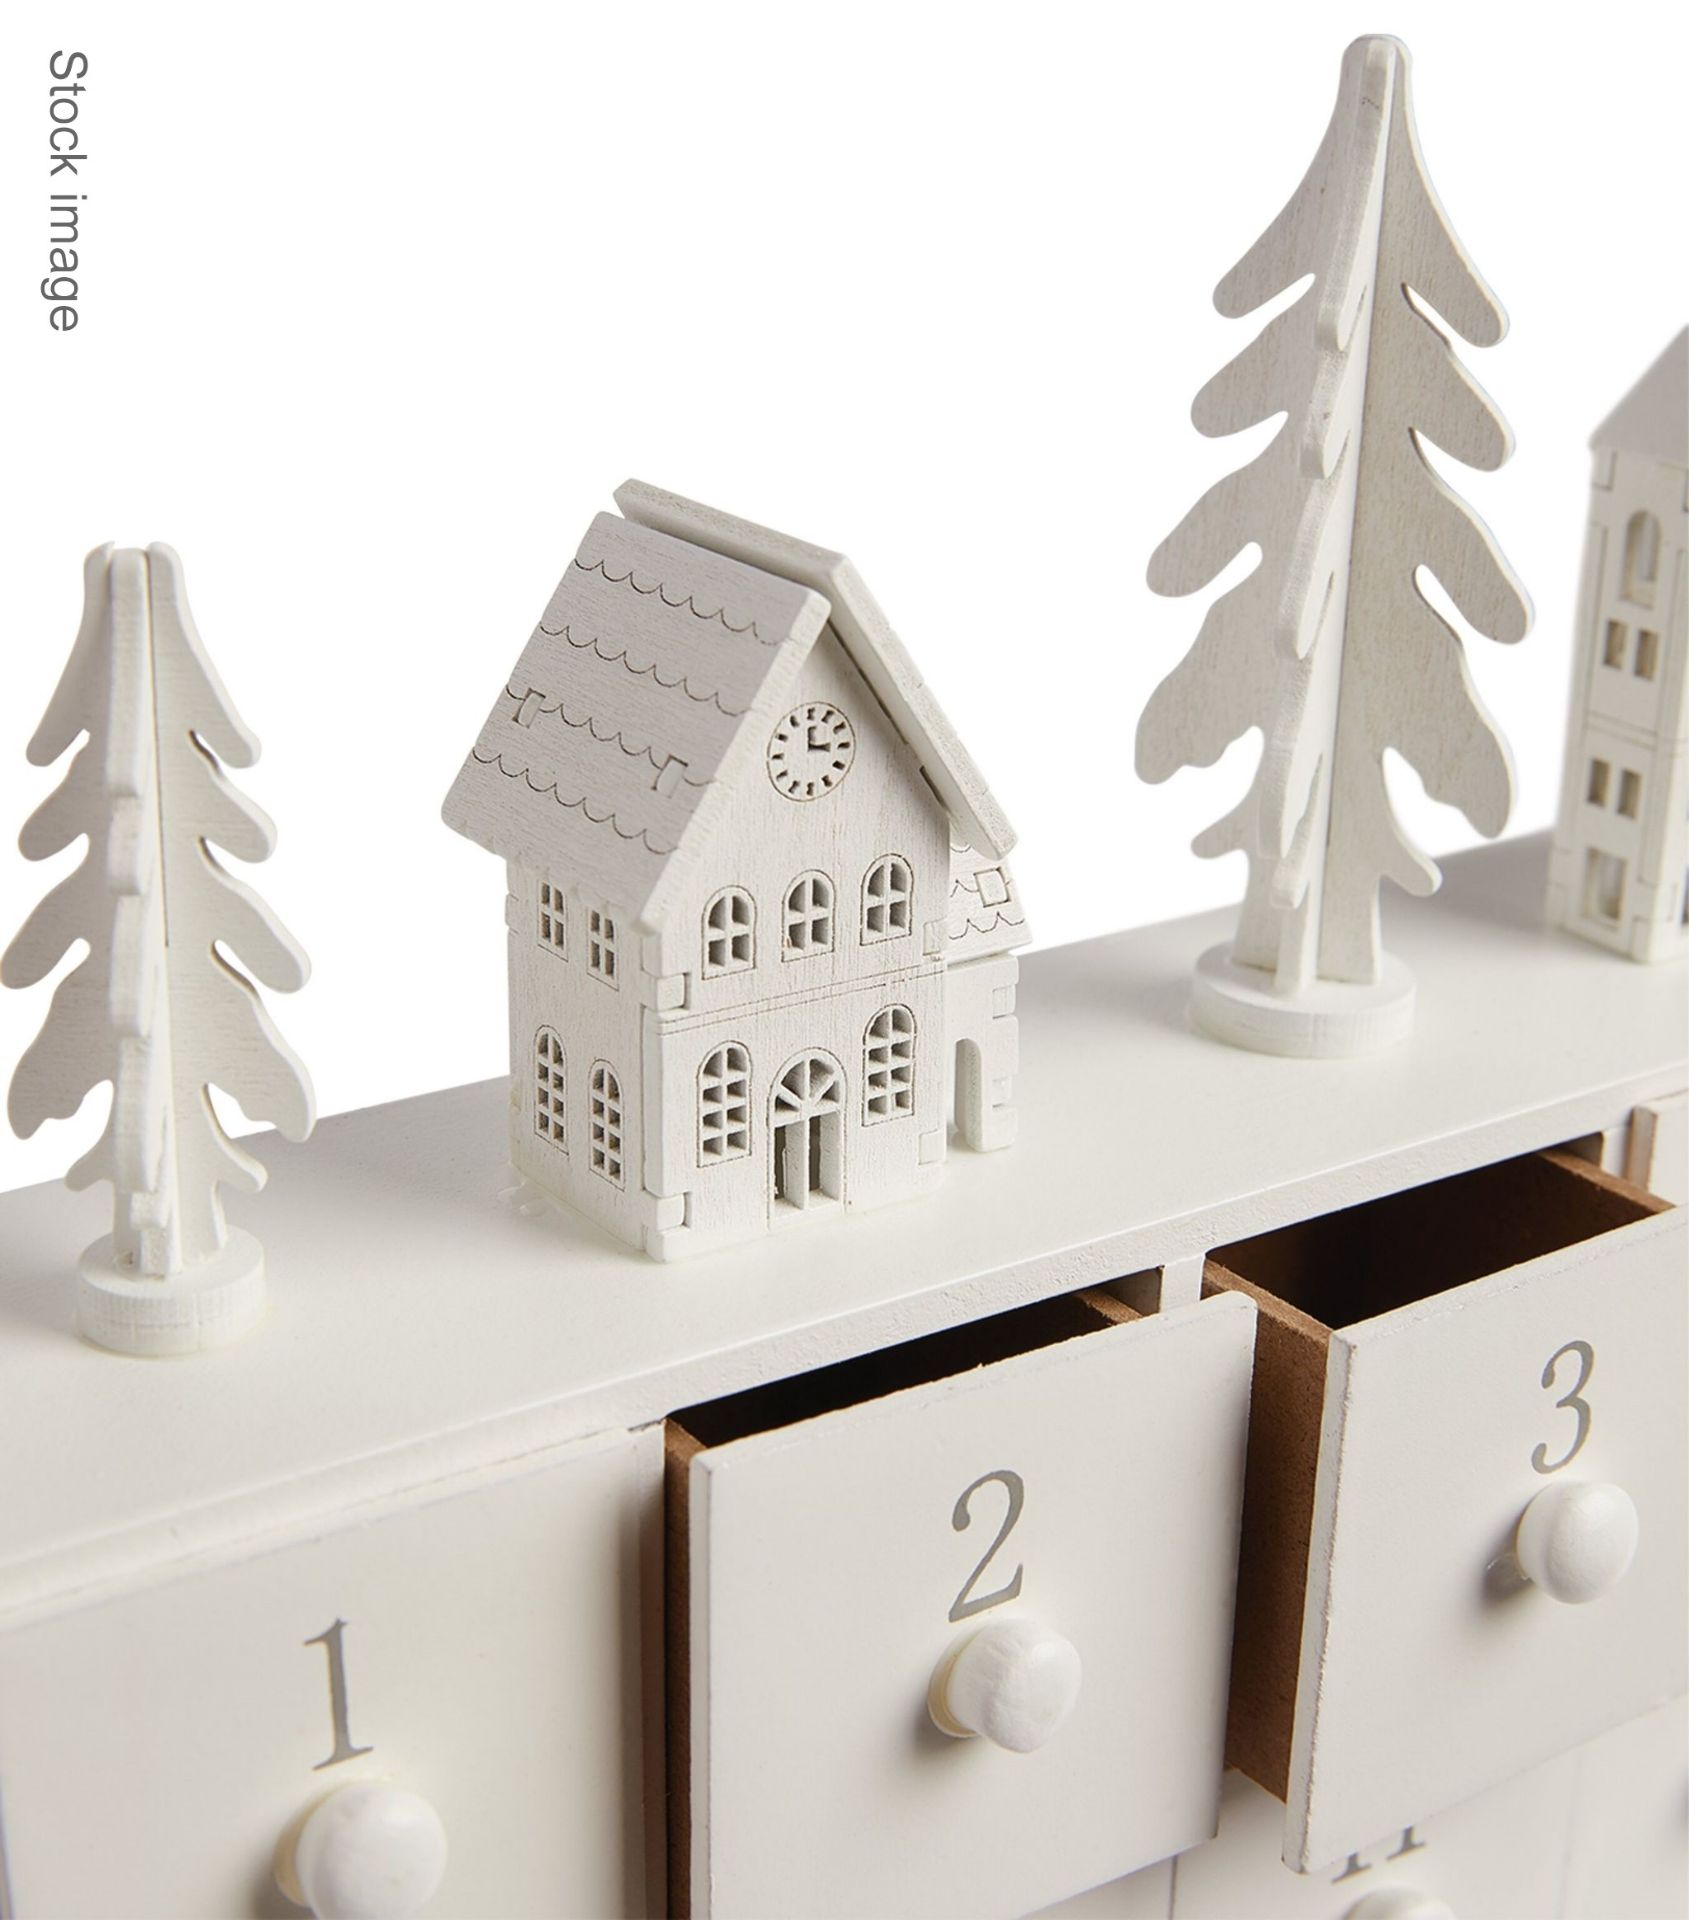 1 x HARRODS OF LONDON Wooden White Street Advent Calendar With Drawers - Ref: 6825630/HAS2164/WH2- - Image 2 of 5